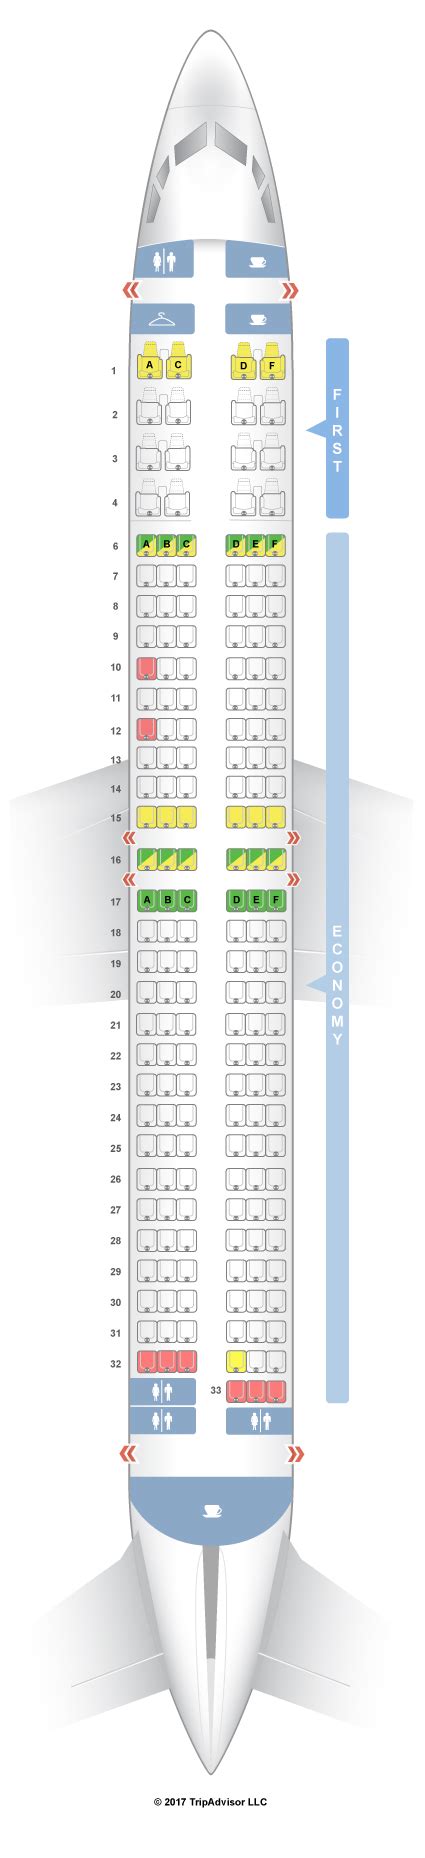 Alaska 737 900 seat map. Food & Snacks. Seat 1A is a standard first class window seat with 36" of seat pitch, which is average across Boeing 737-900's worldwide. 1A is positioned at the bulkhead, which means that no seat can recline into your space, but it may mean limited legroom for taller travelers, and there is no under-seat stowage during takeoff and landing. 